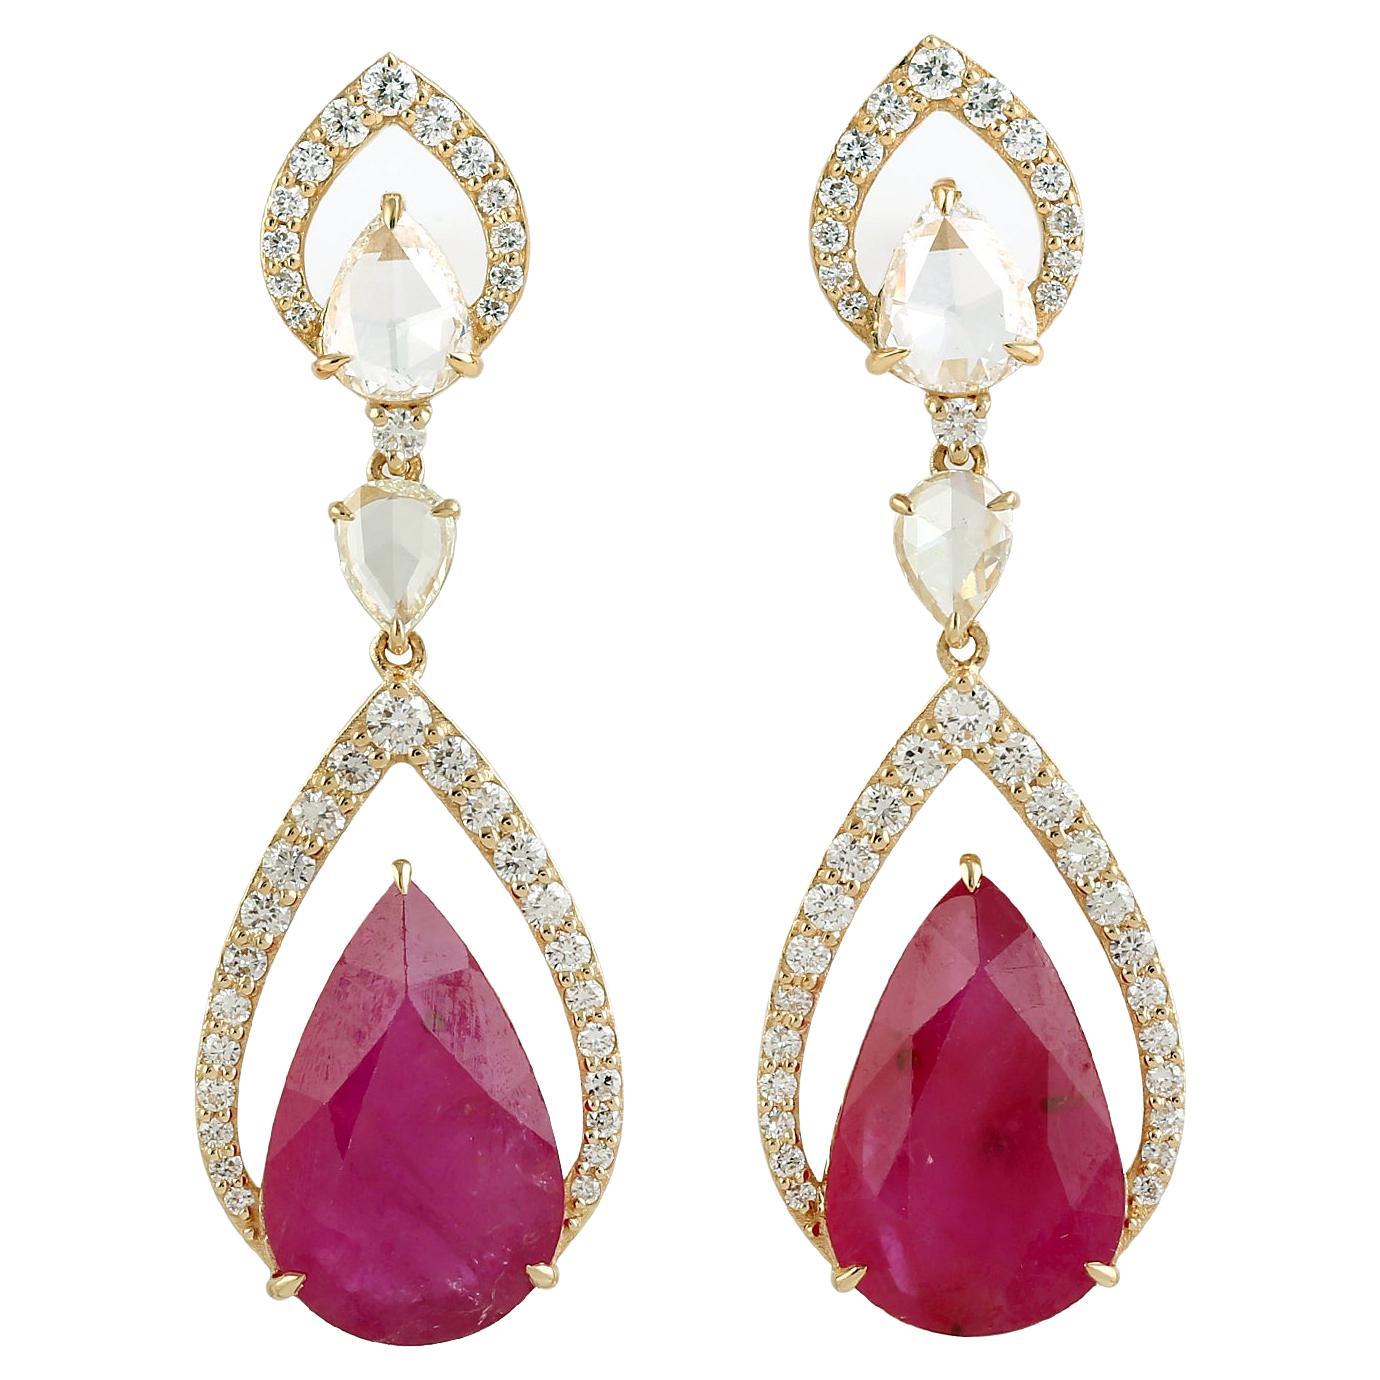 Two Tier Mosambic Ruby Dangle Earrings With Diamonds Made In 18k White Gold For Sale